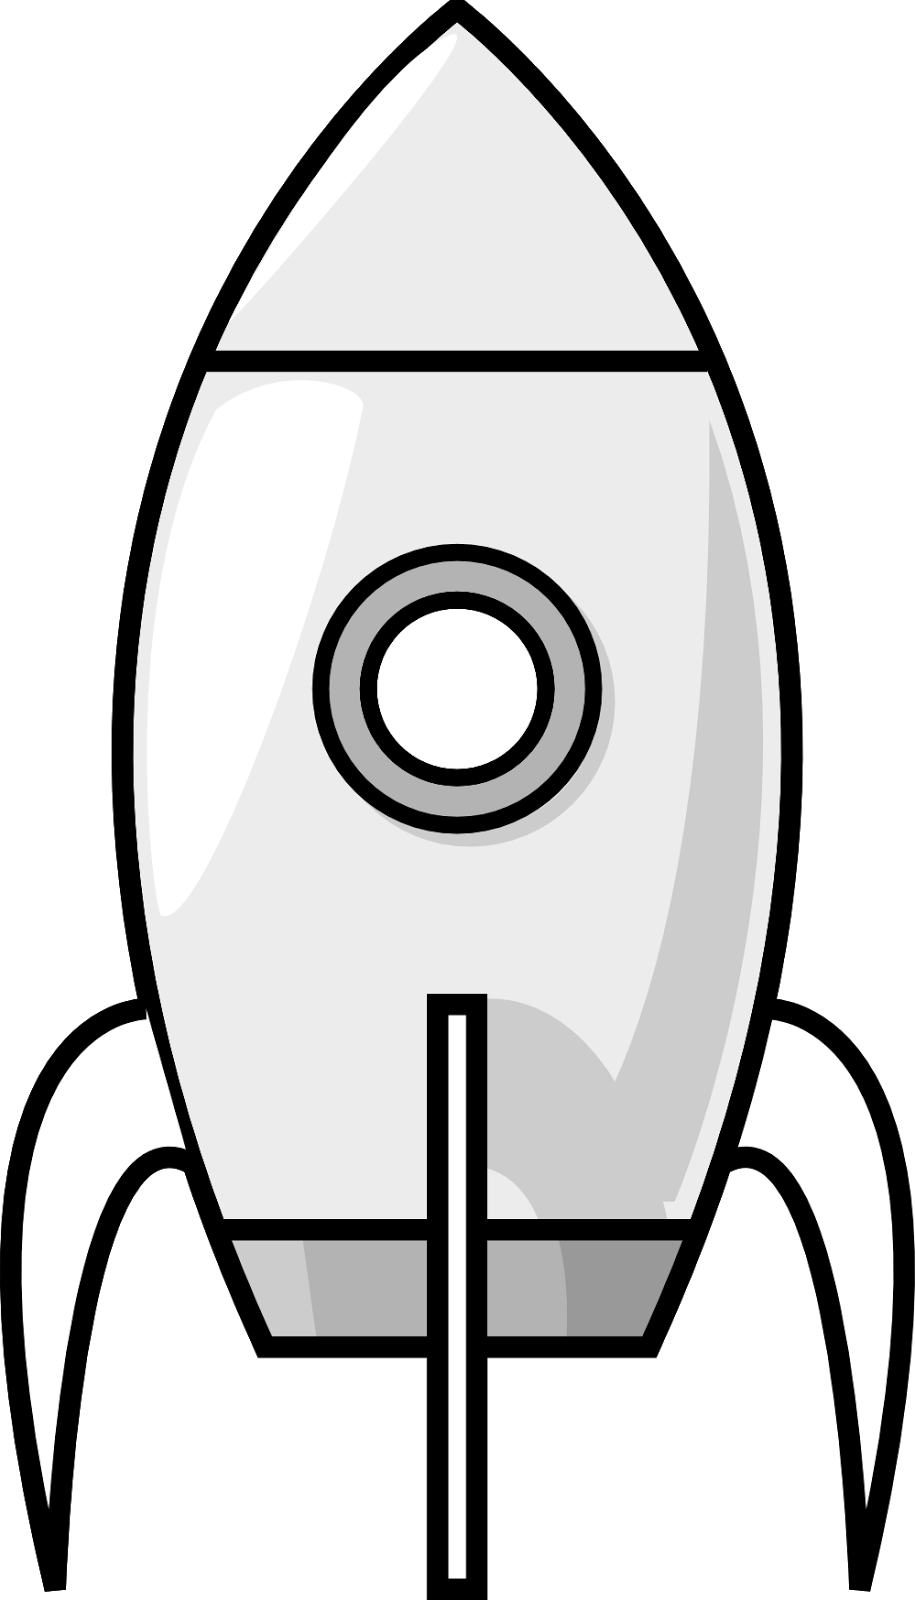 A Cartoon Rocket With Two Rockets